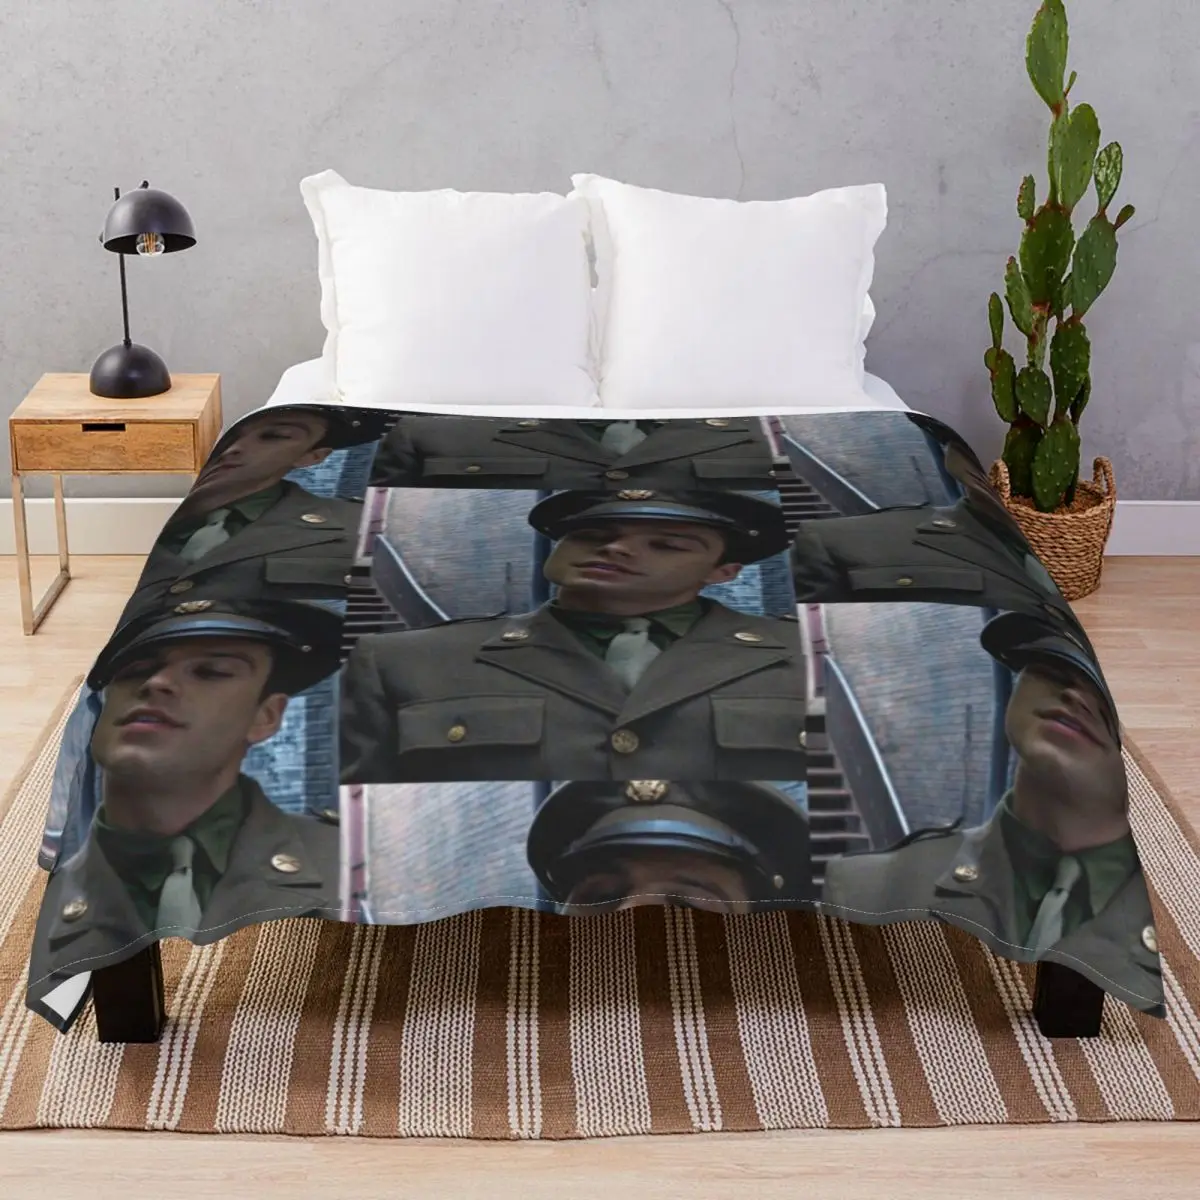 

Bucky Barnes Blankets Fleece Autumn Comfortable Throw Blanket for Bed Home Couch Travel Office